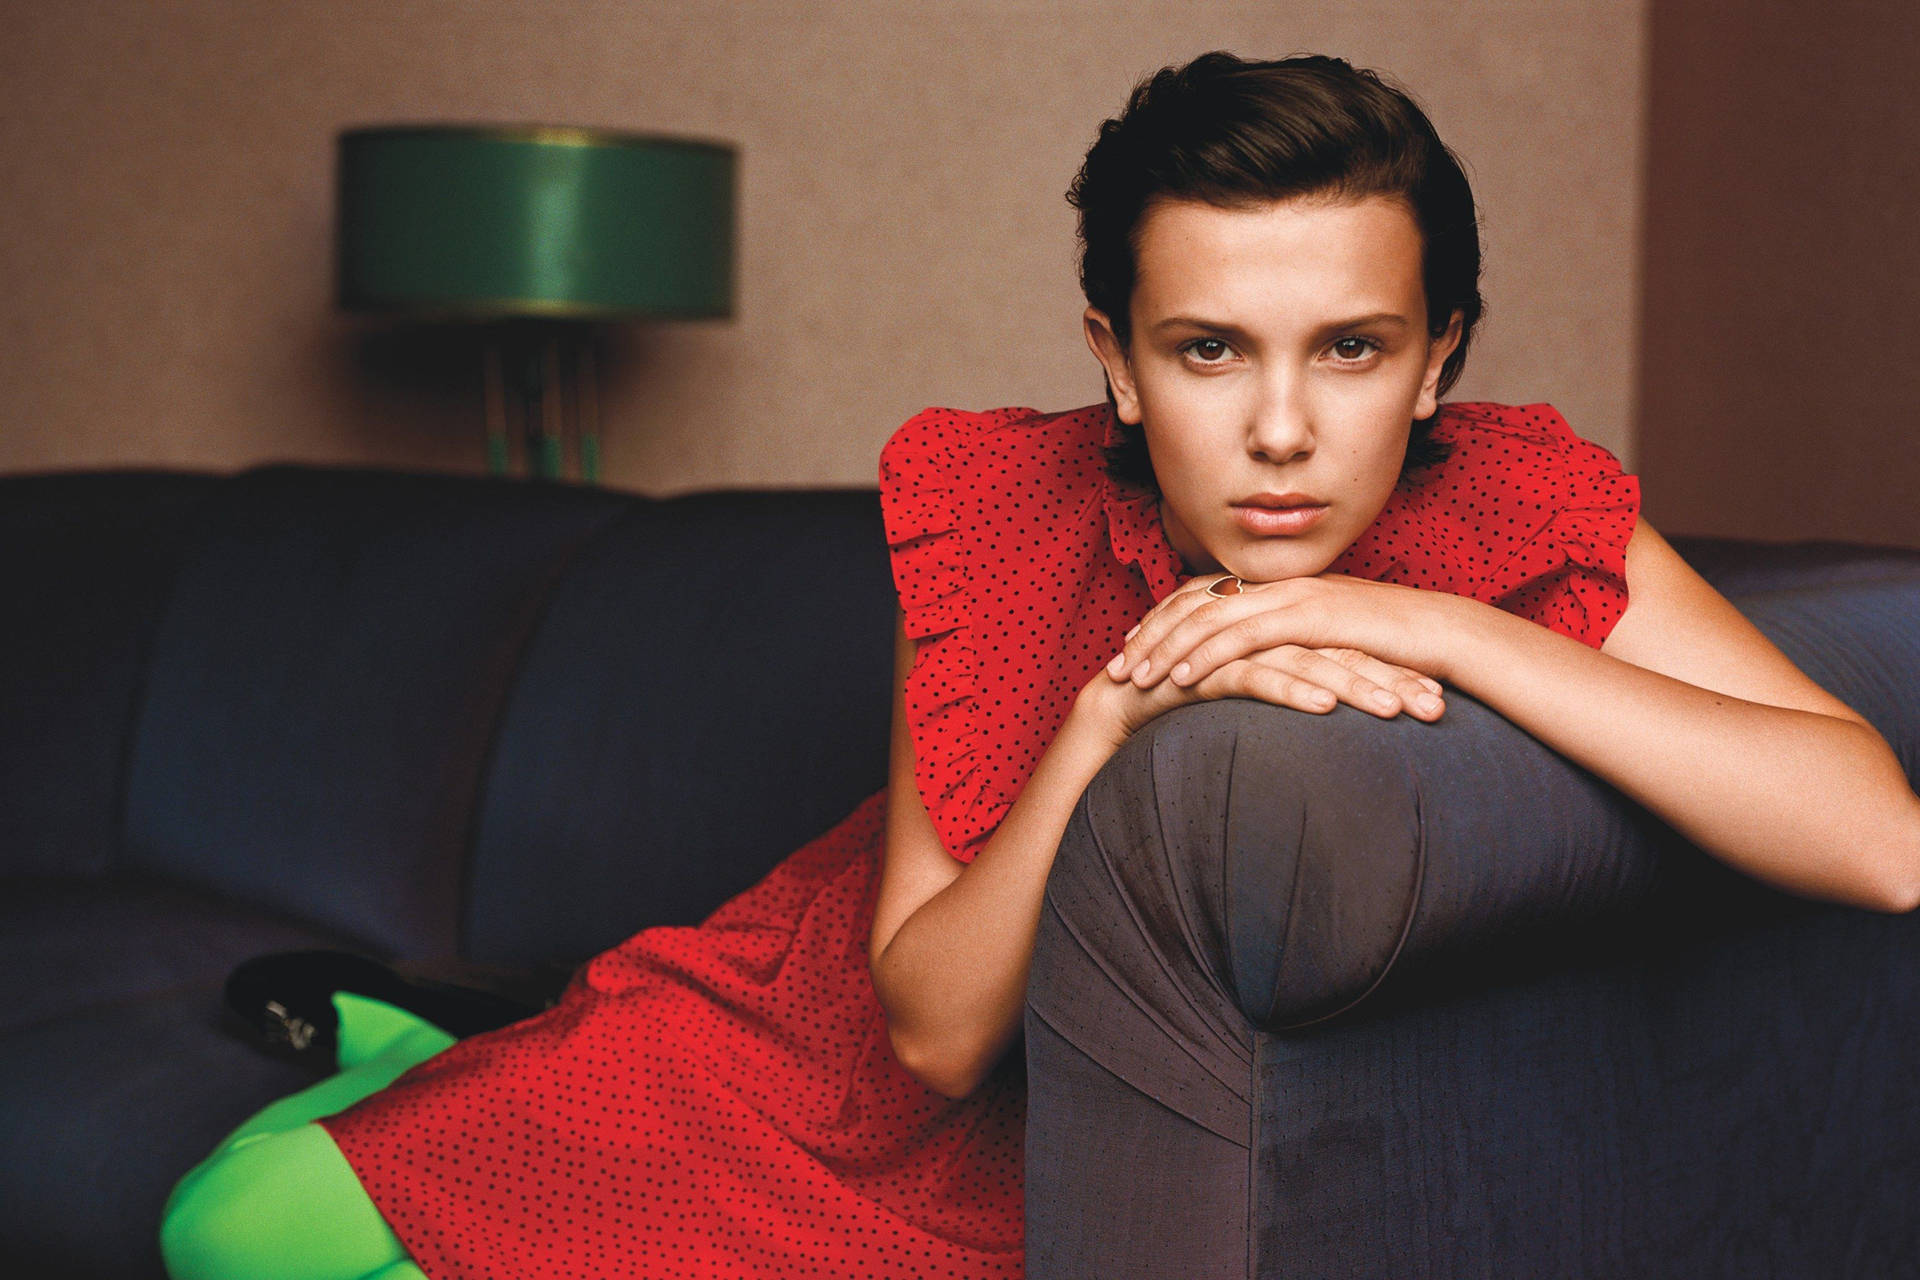 Free Millie Bobby Brown Background Photos, [100+] Millie Bobby Brown  Background for FREE 